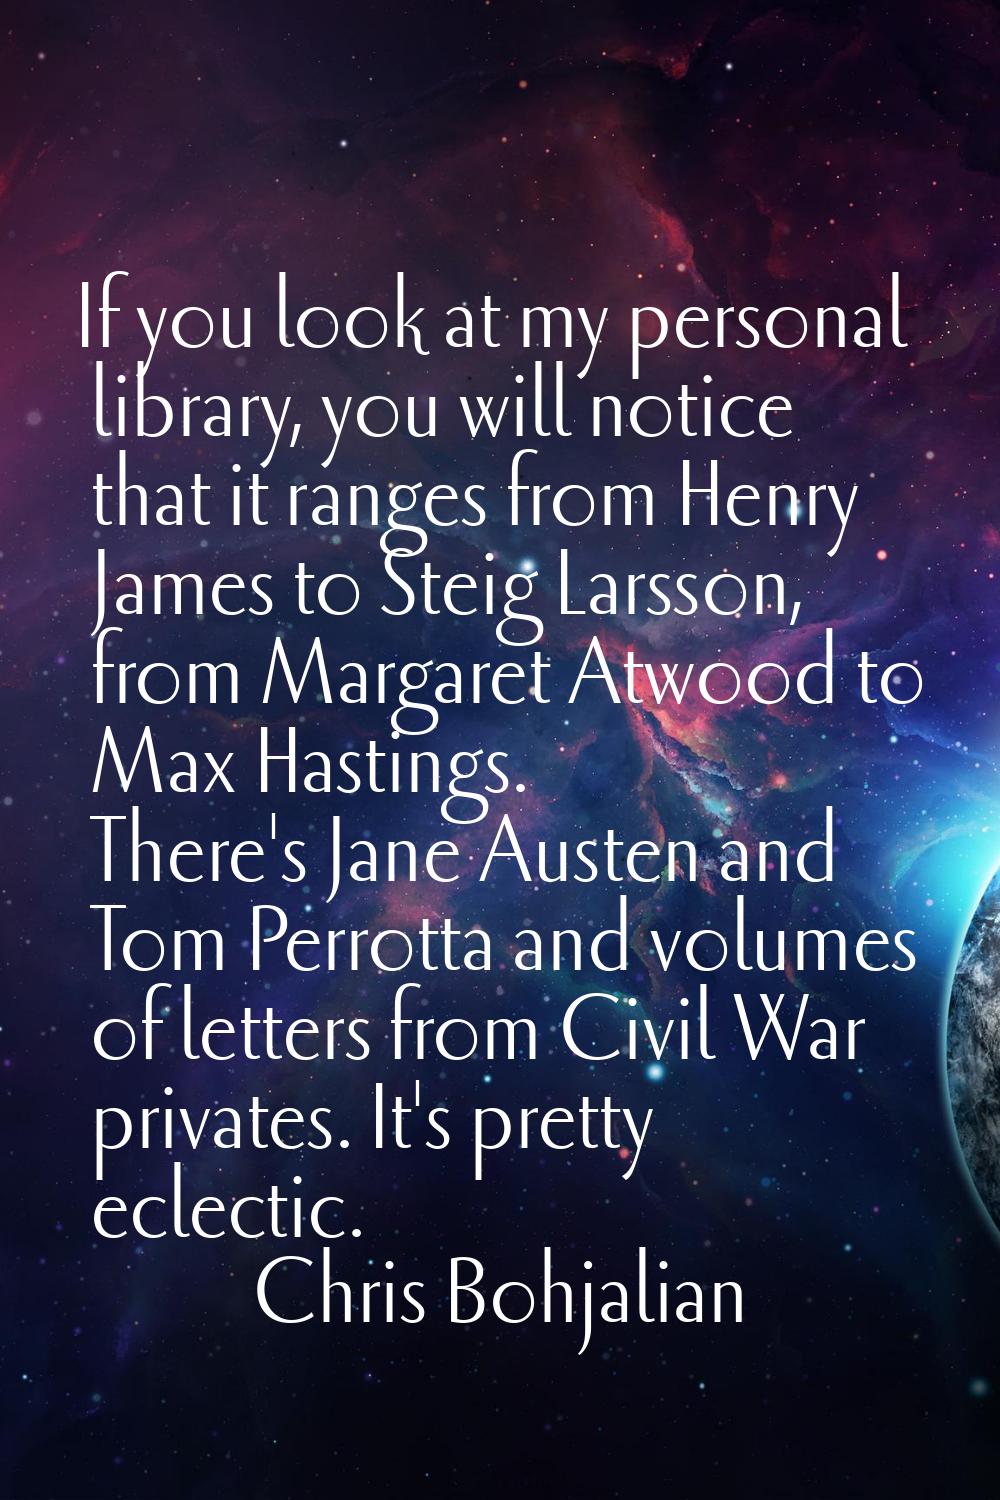 If you look at my personal library, you will notice that it ranges from Henry James to Steig Larsso